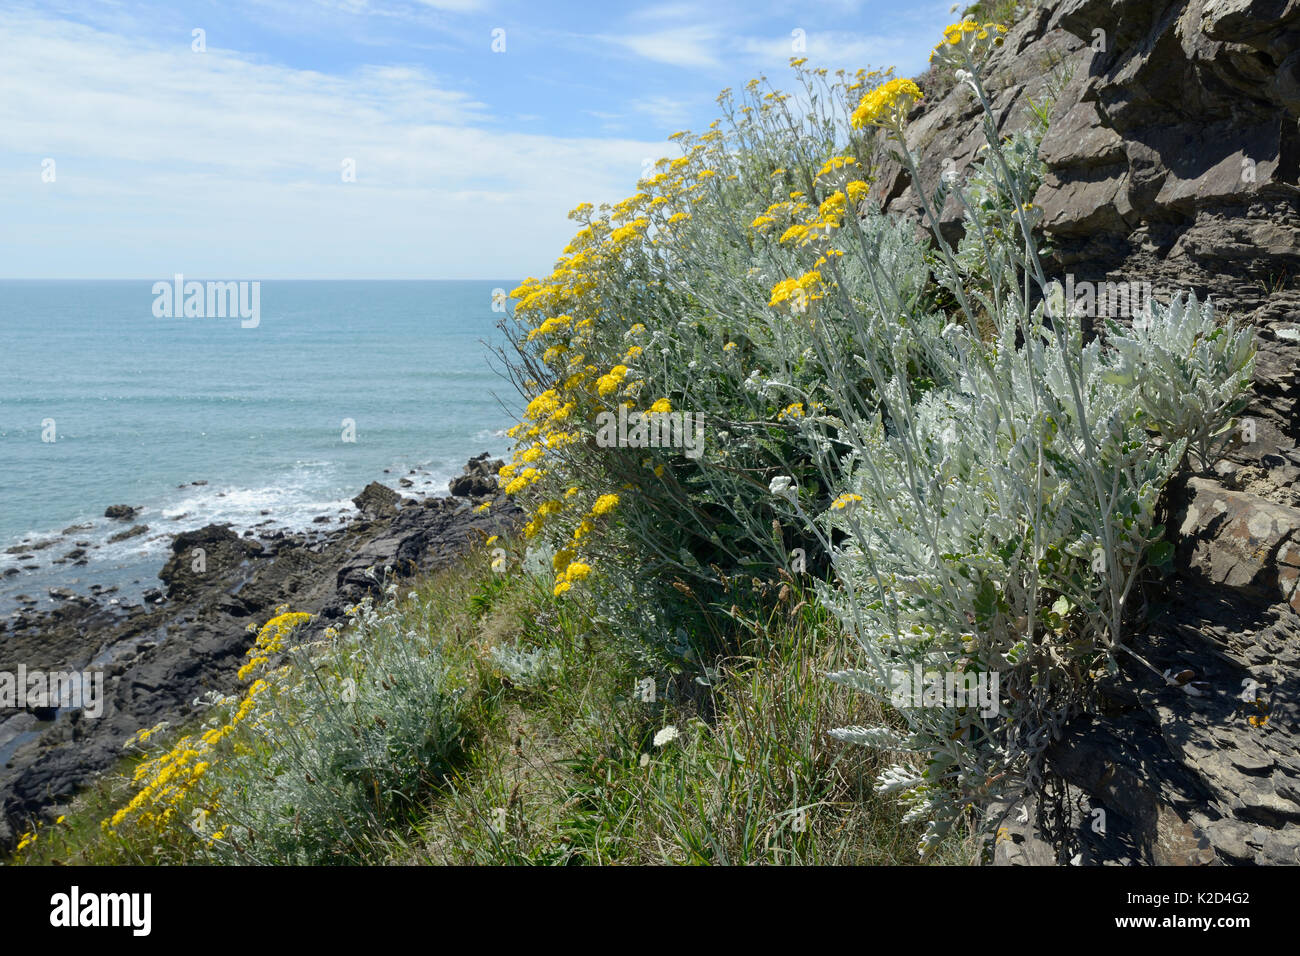 Silver ragwort / Dusty Miller (Jacobaea maritima / Senecio cineraria), a Mediterranean species becoming naturalised on UK coasts, flowering on a cliff face, Widemouth Bay, Cornwall, UK, June. Stock Photo